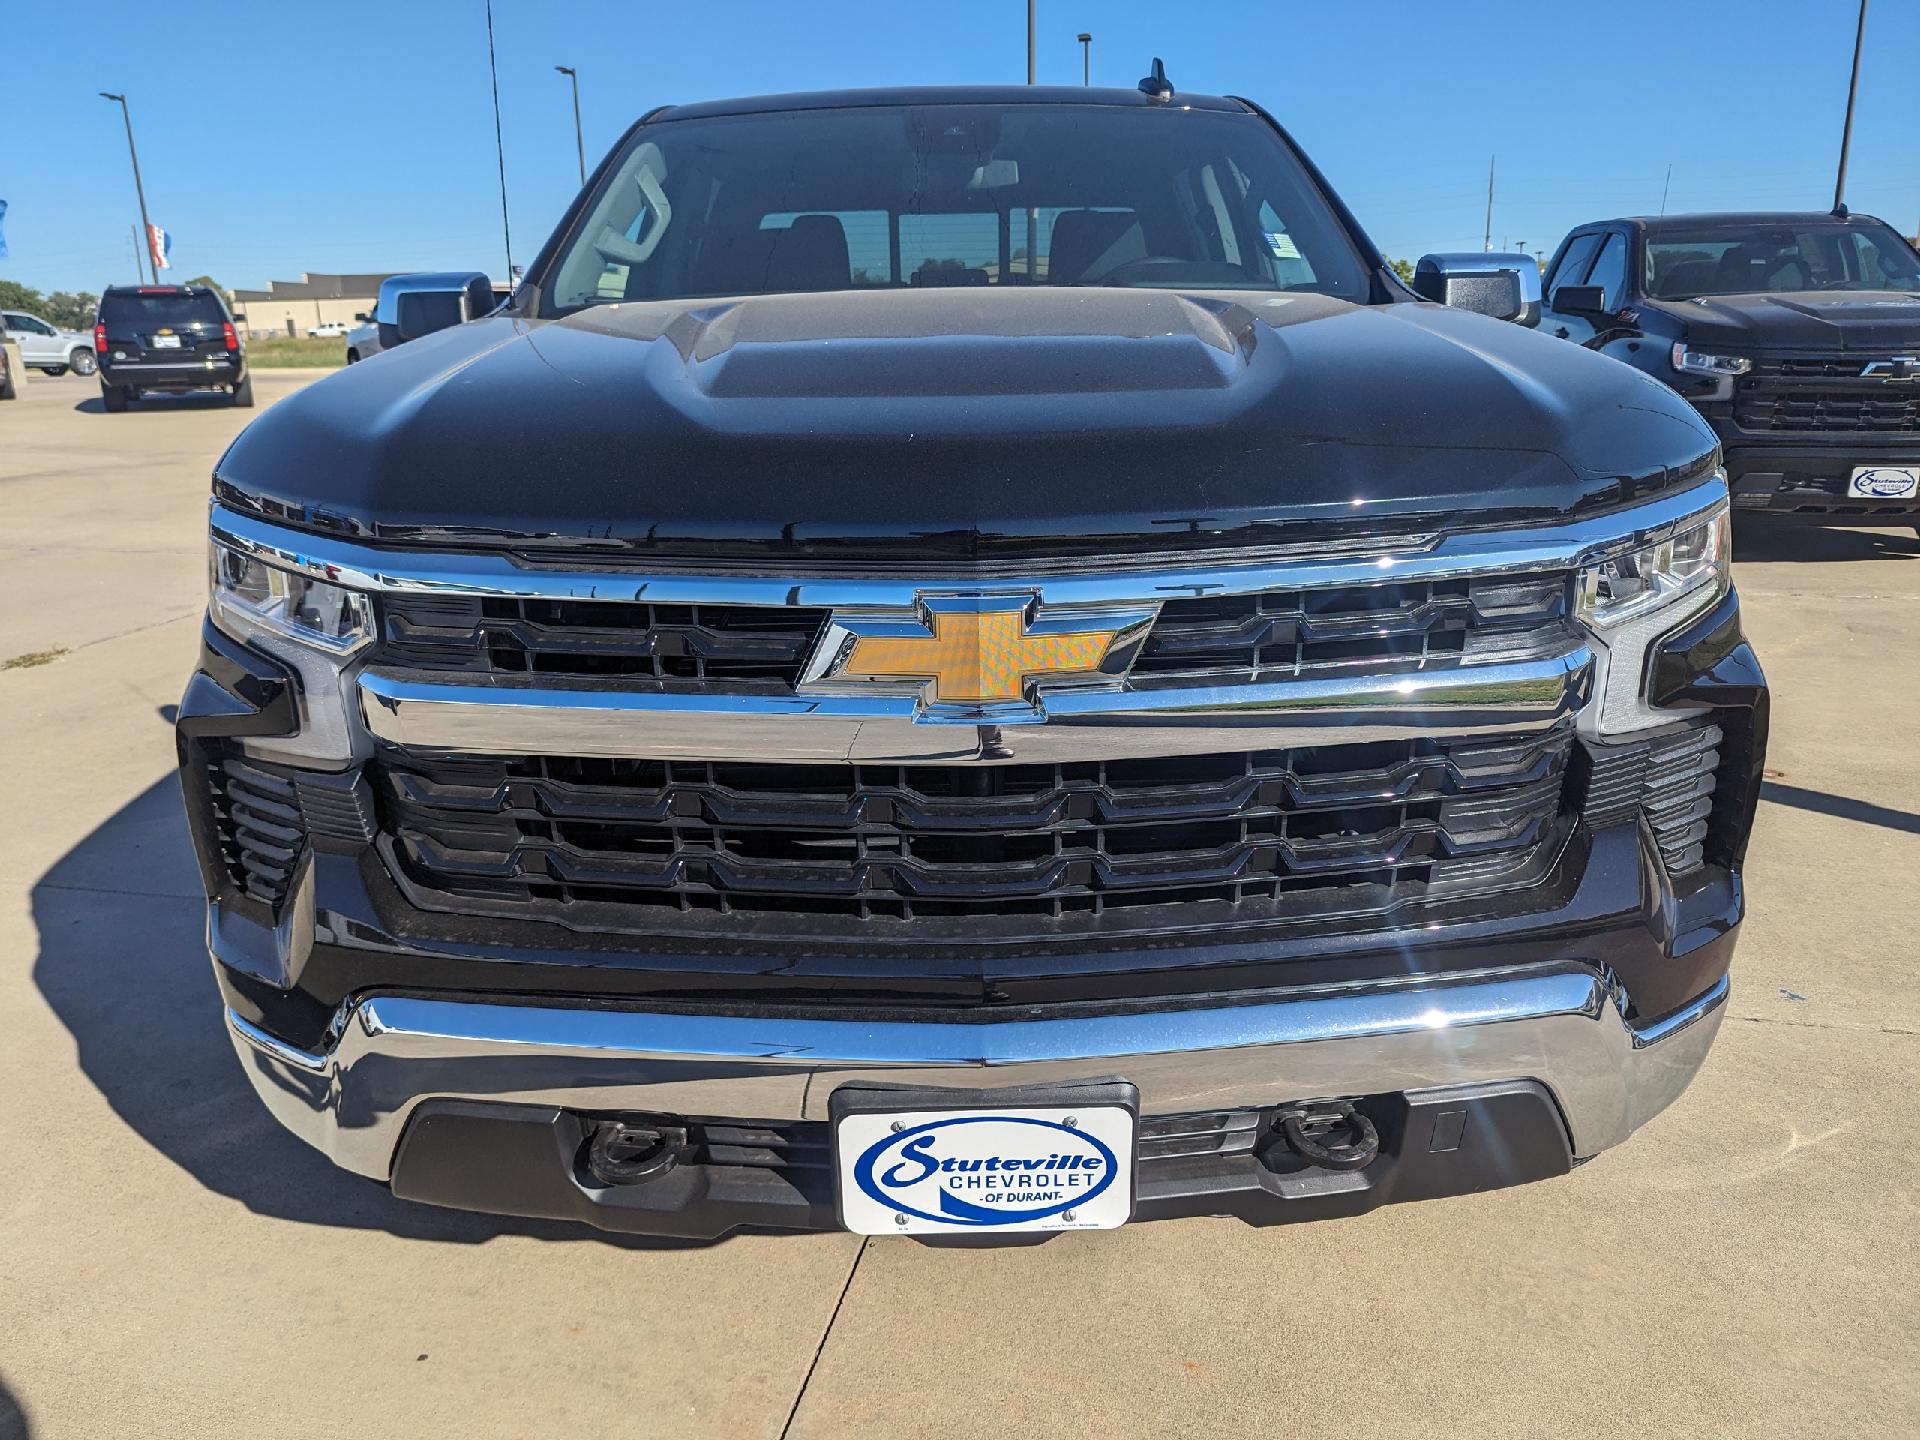 Welcome to Stuteville Chevrolet in DURANT